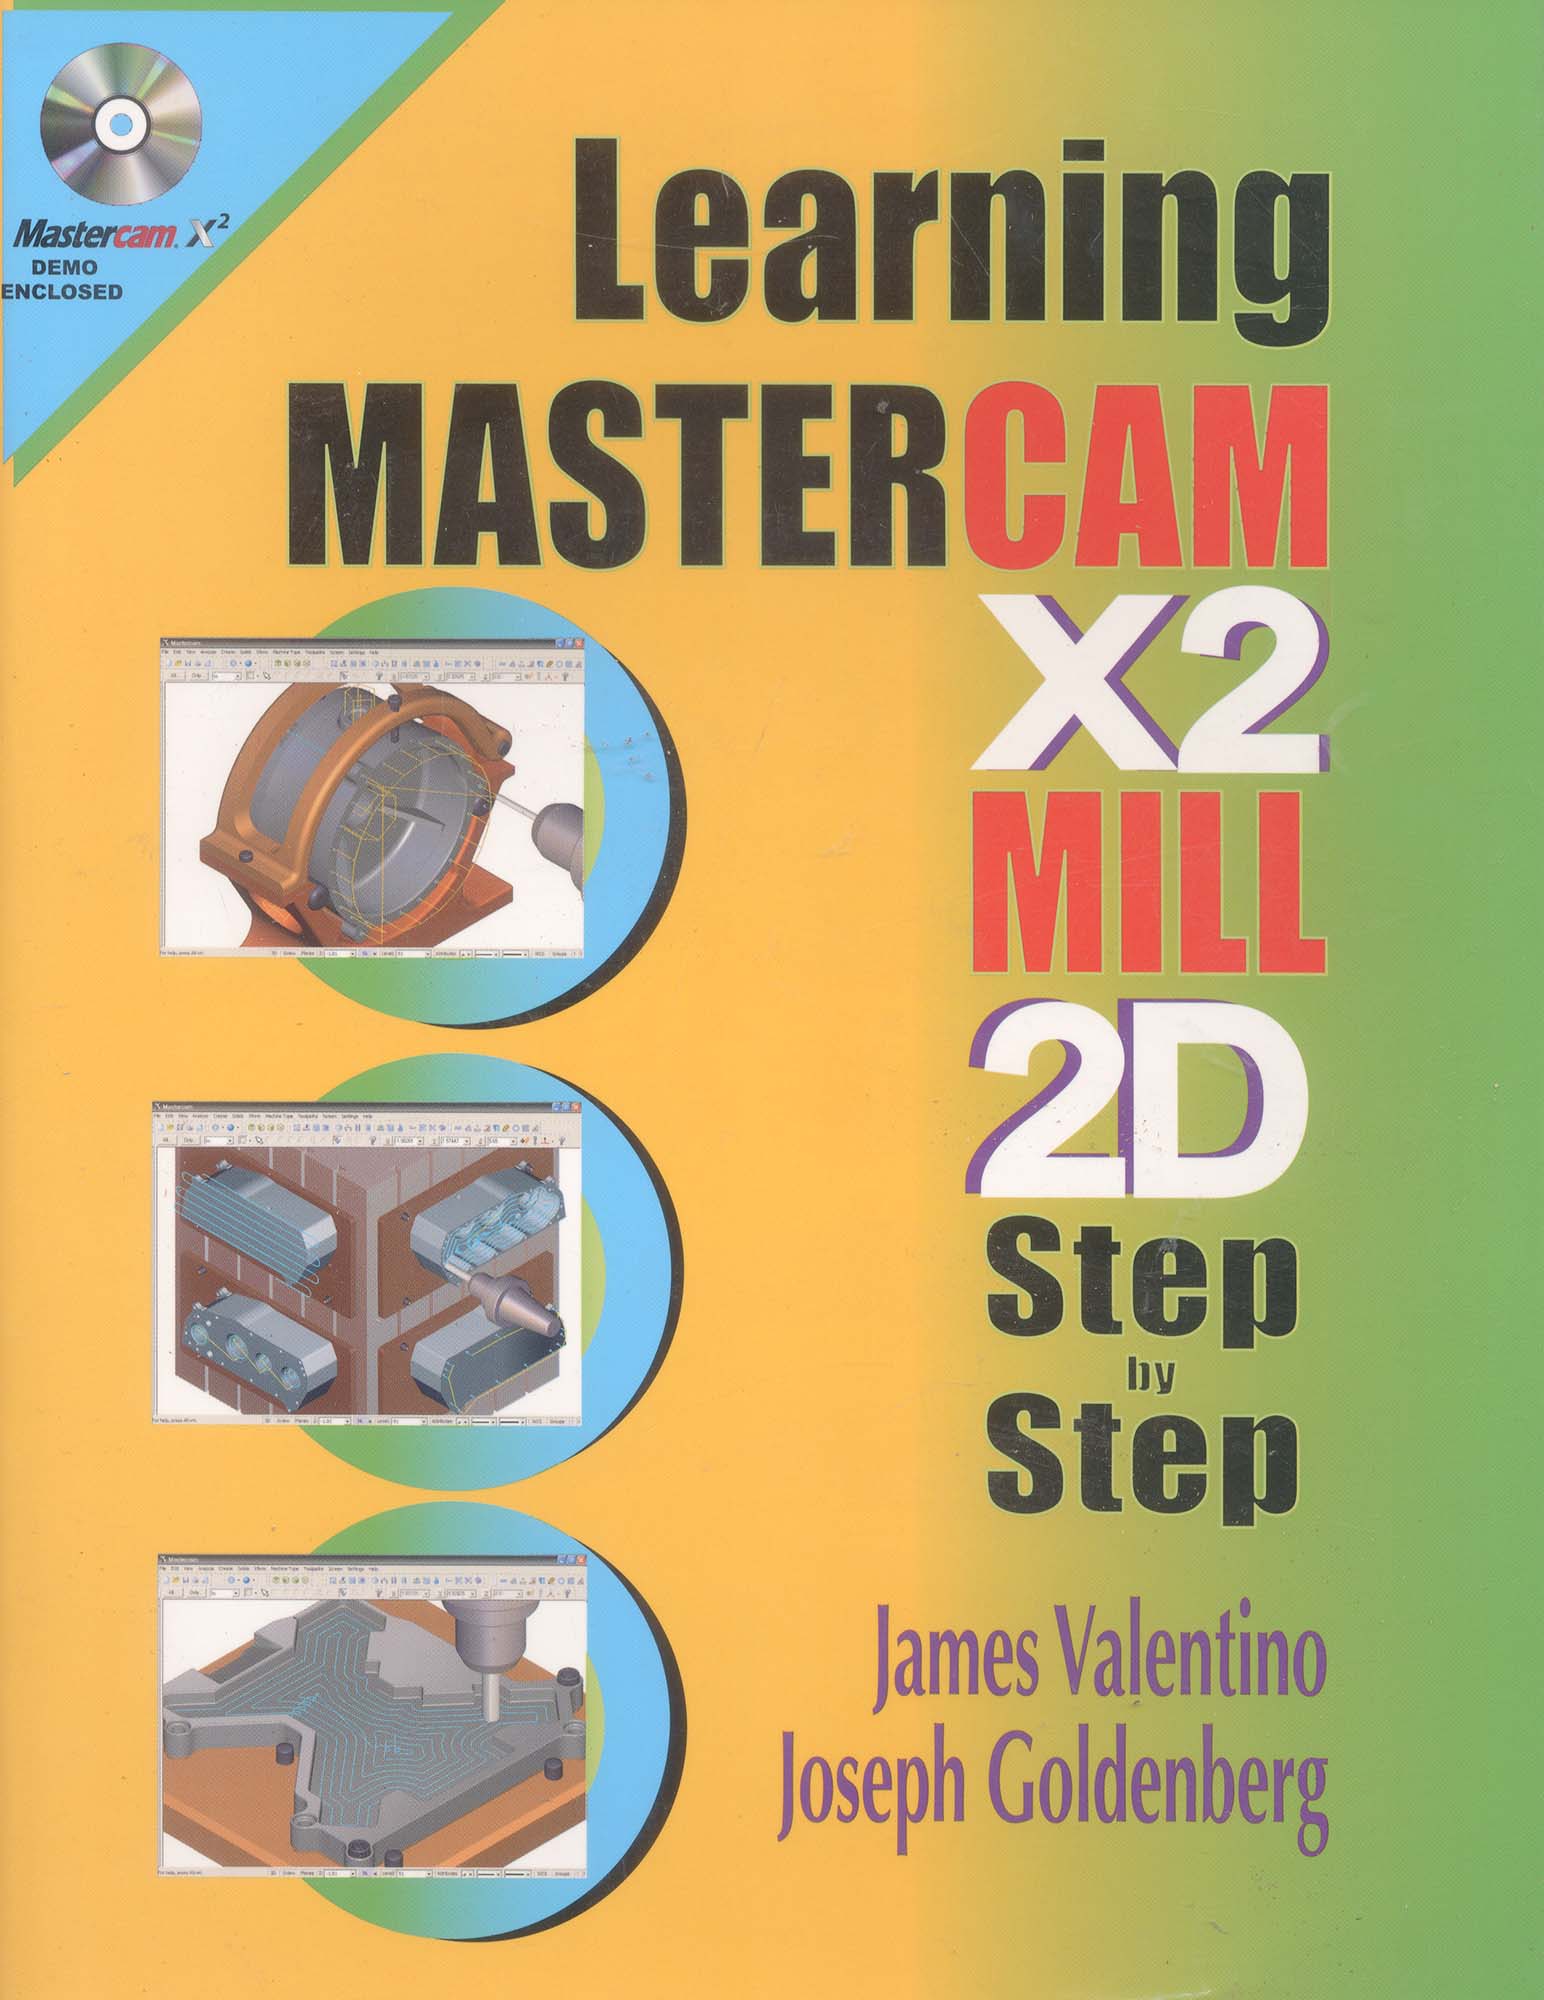 Book-Learning Mastercam X2 Mill in 2D